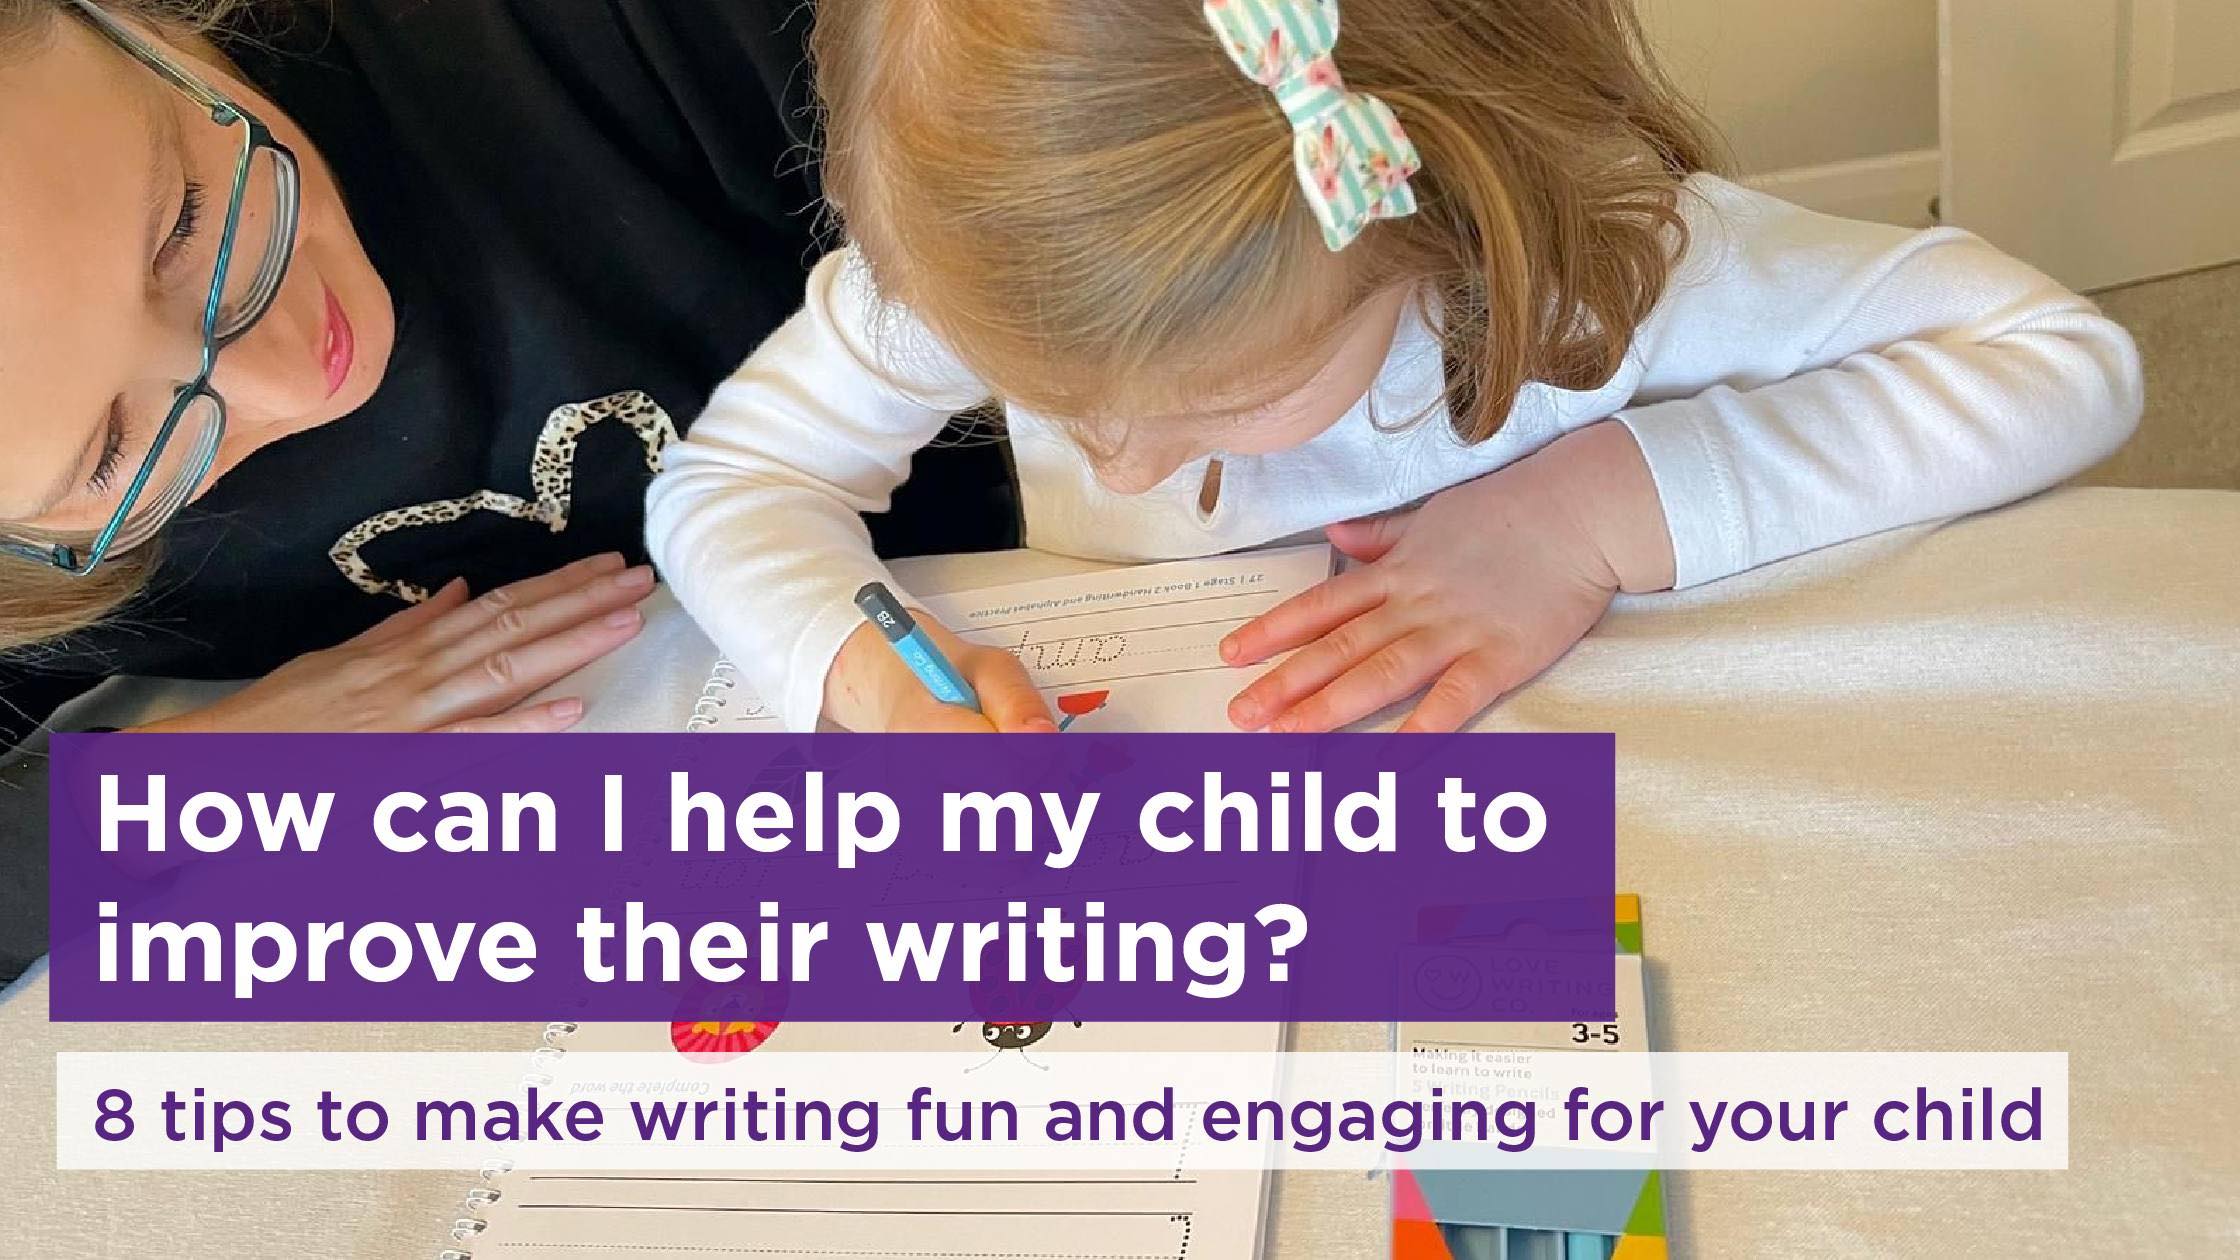 How can I help my child to improve their writing?